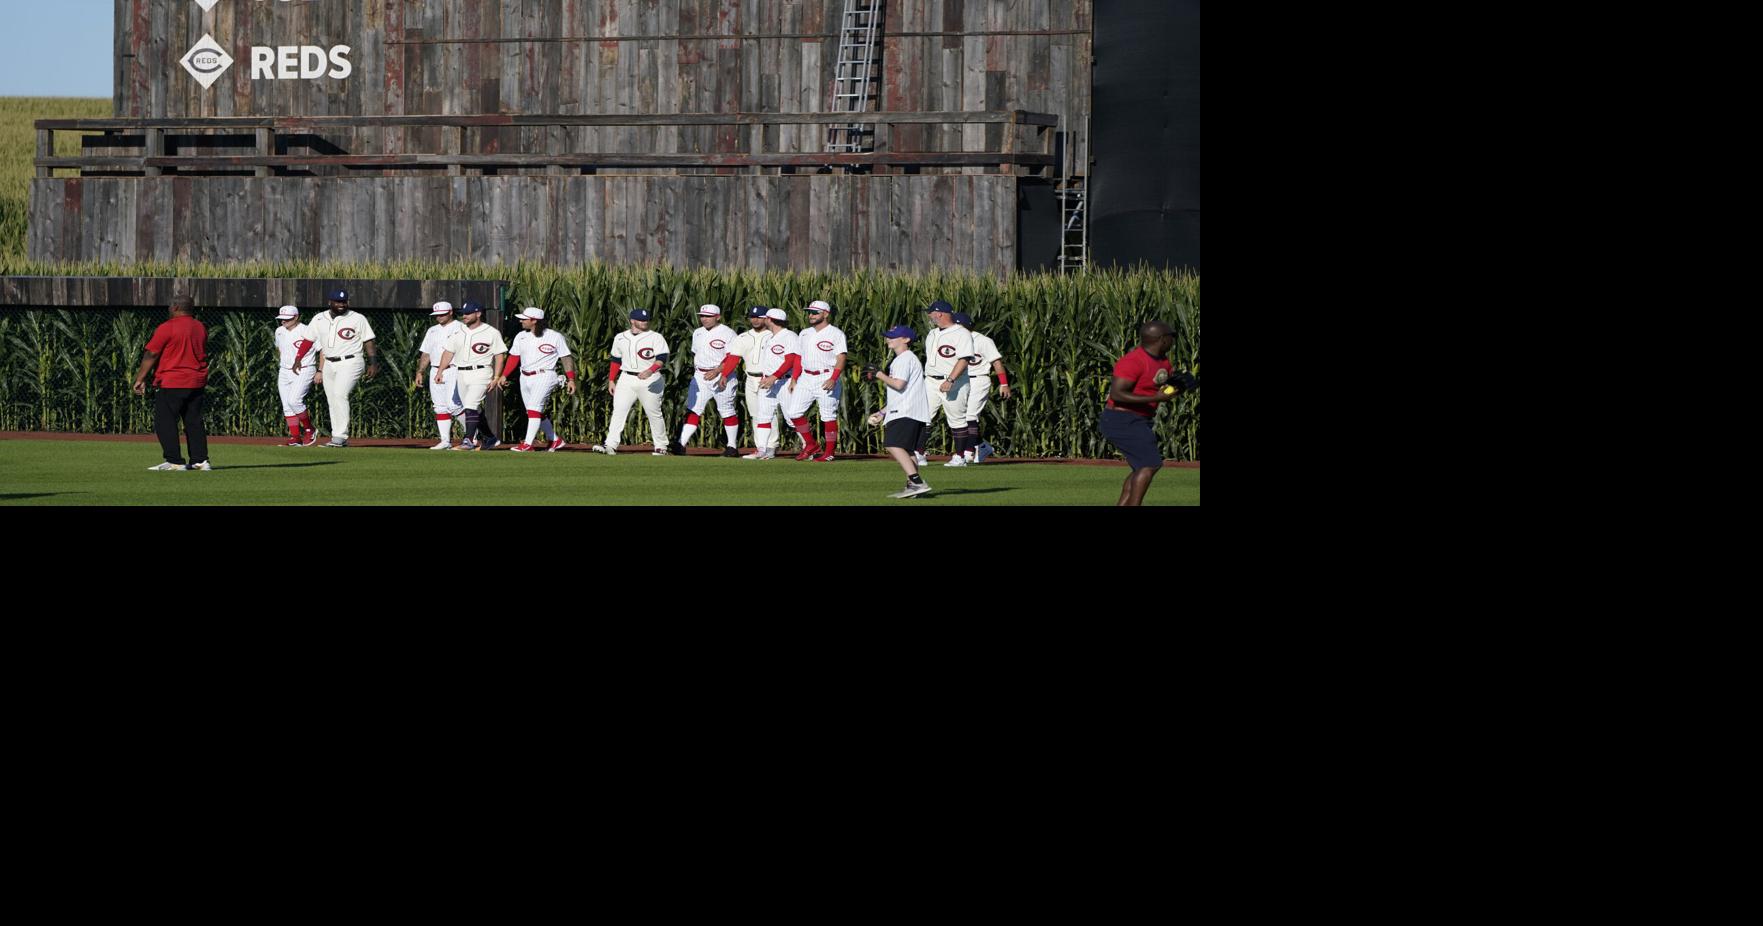 Cubs: Field of Dreams shines again